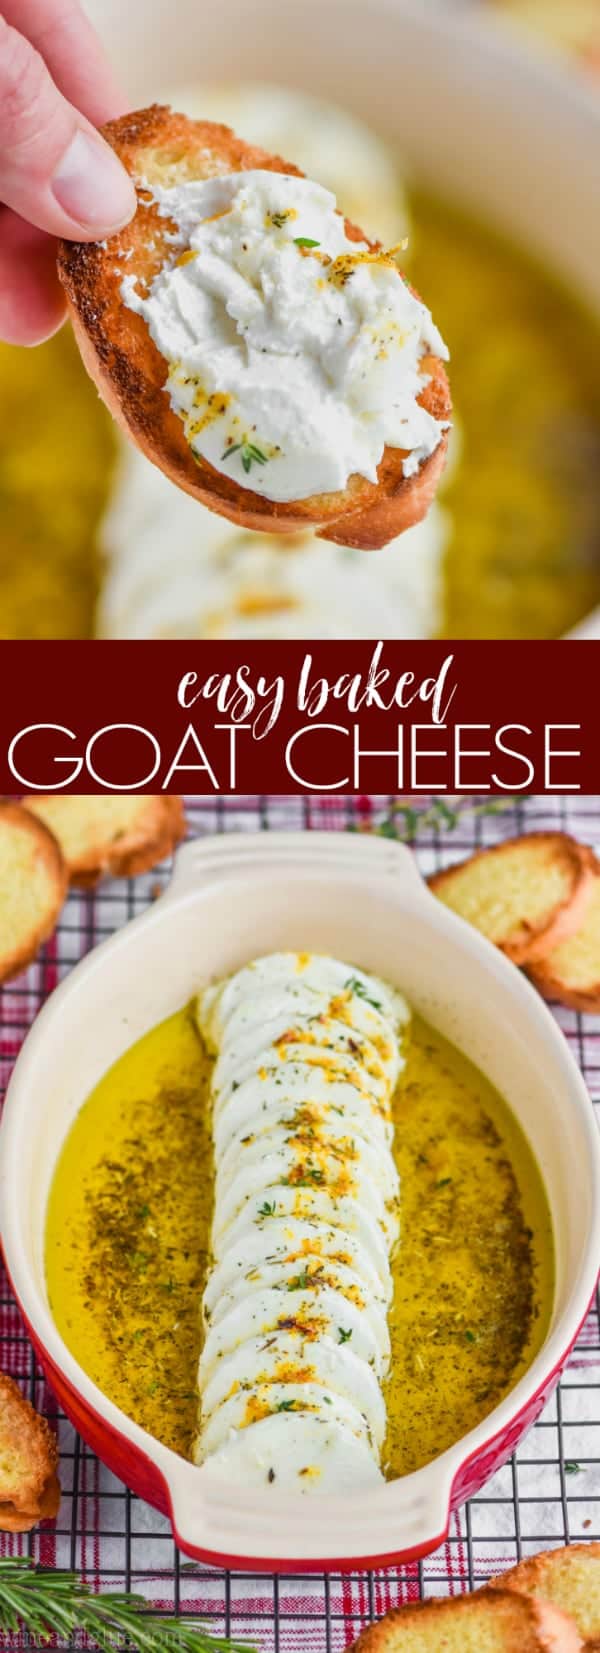 collage of photos of easy baked goat cheese